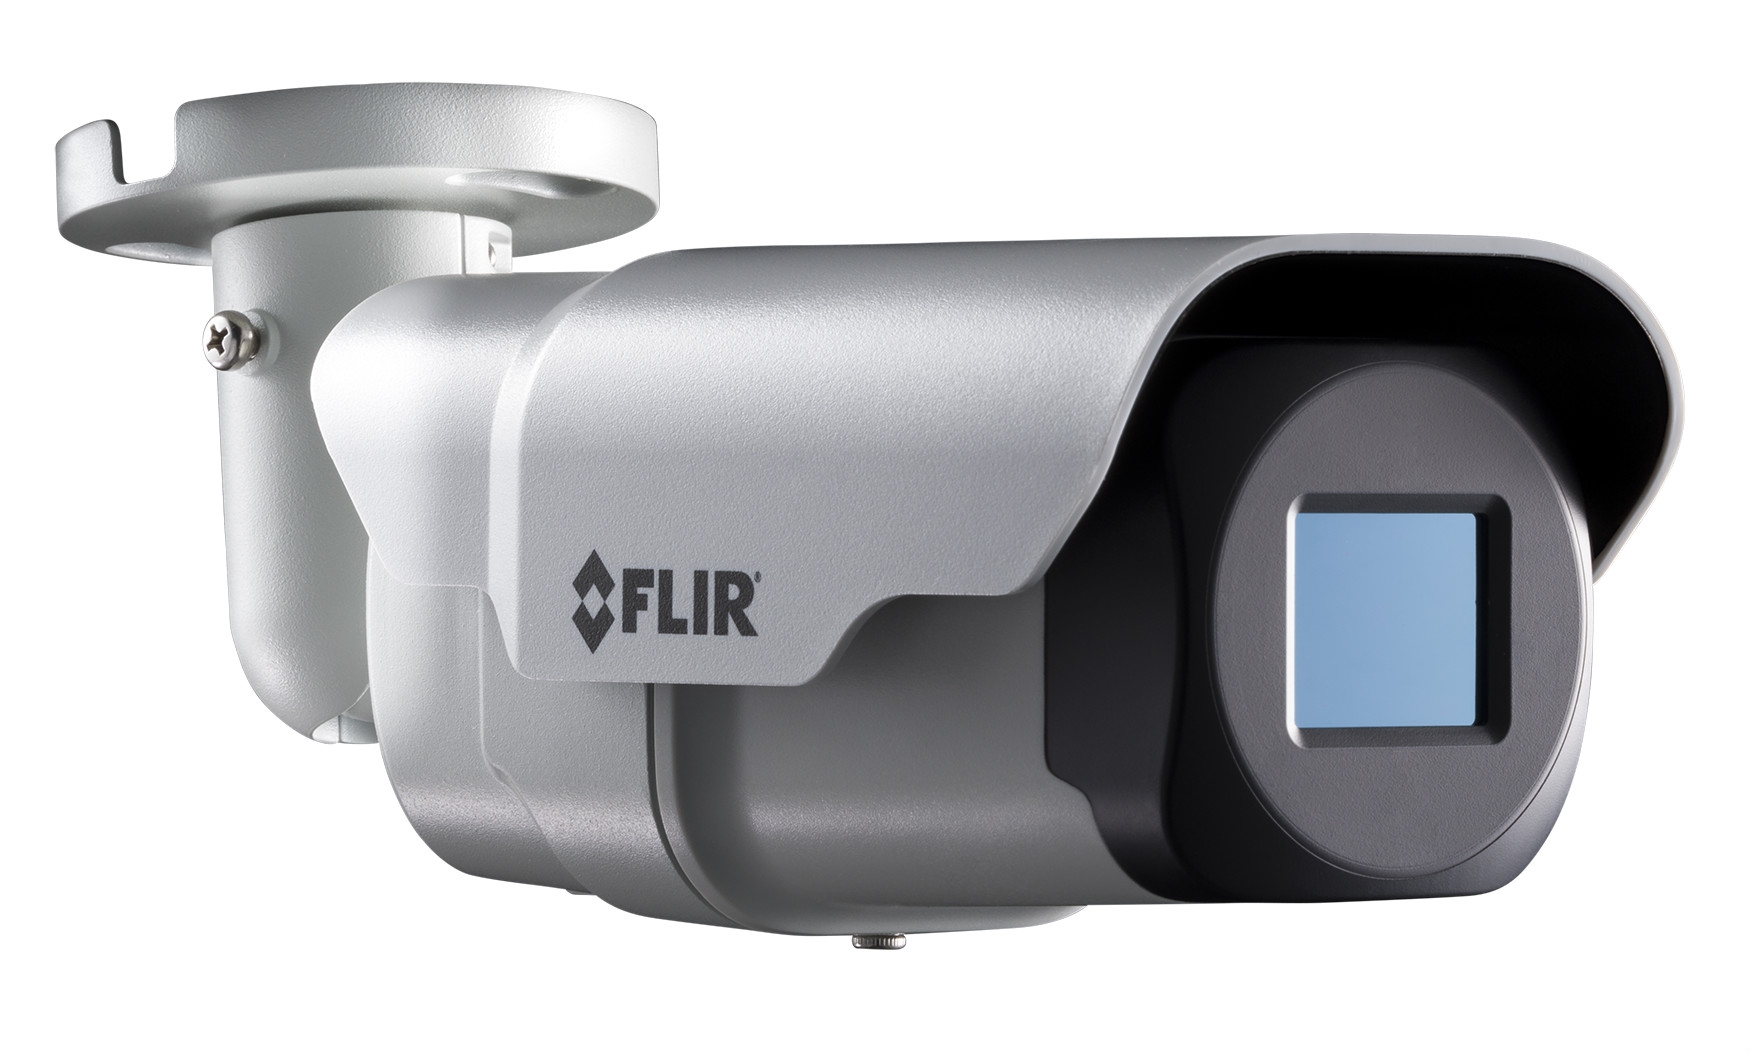 FLIR introduces high-resolution thermal security cameras